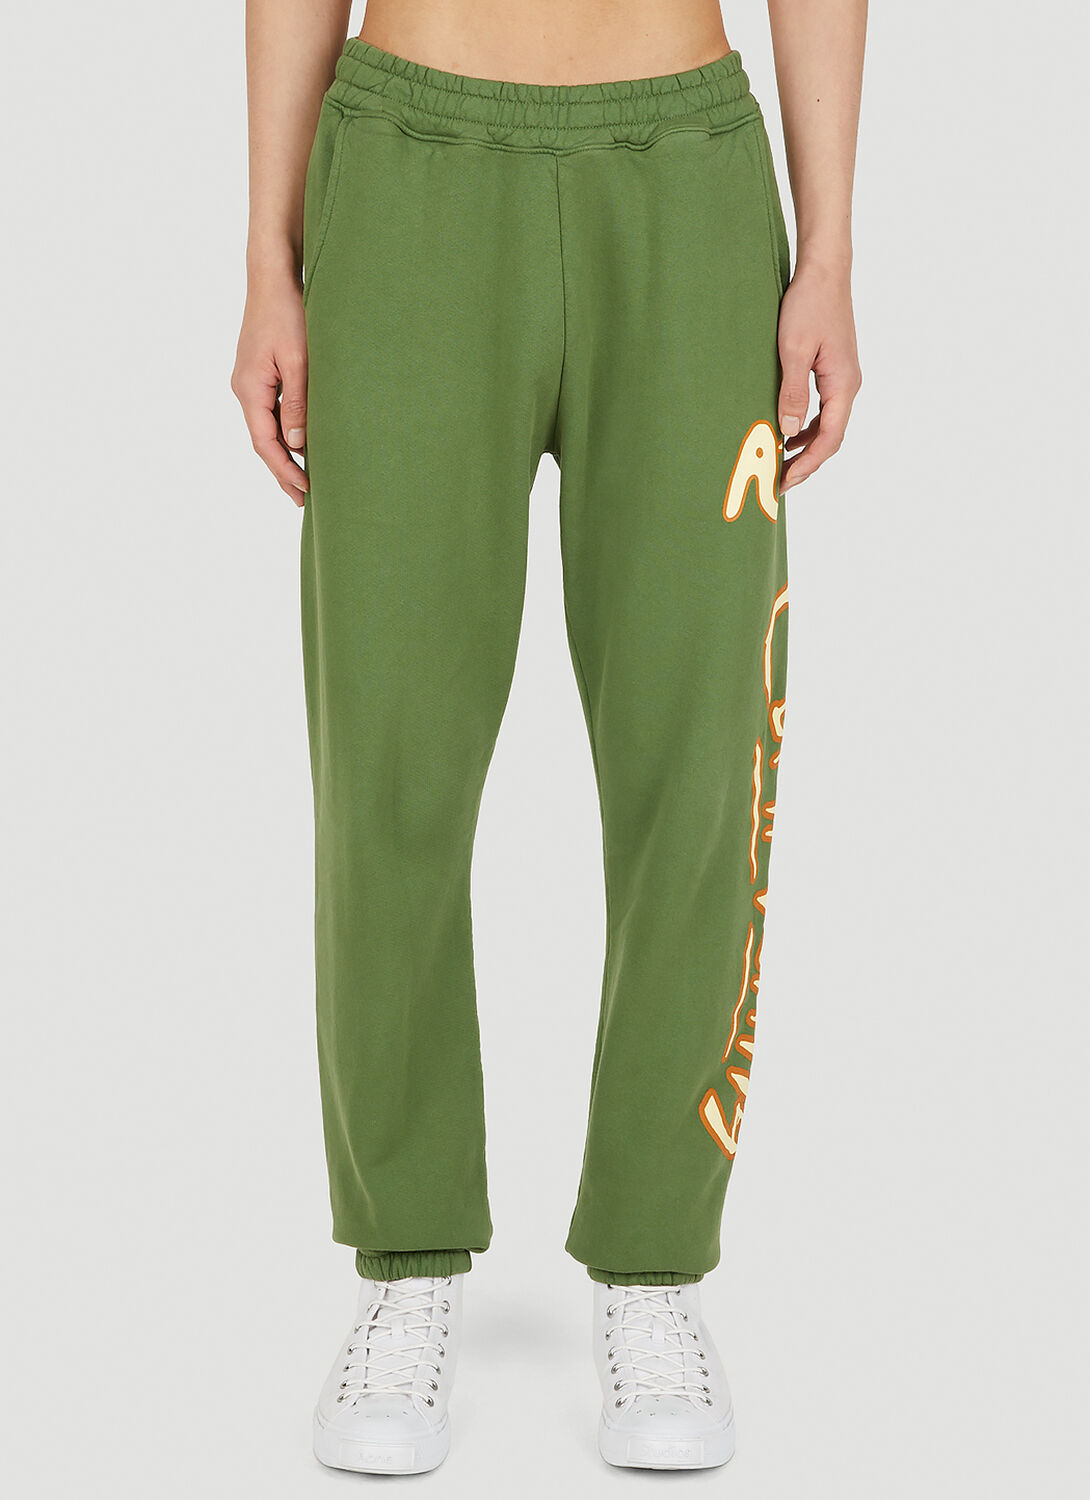 Perks And Mini Community Garden Track Pants In Green